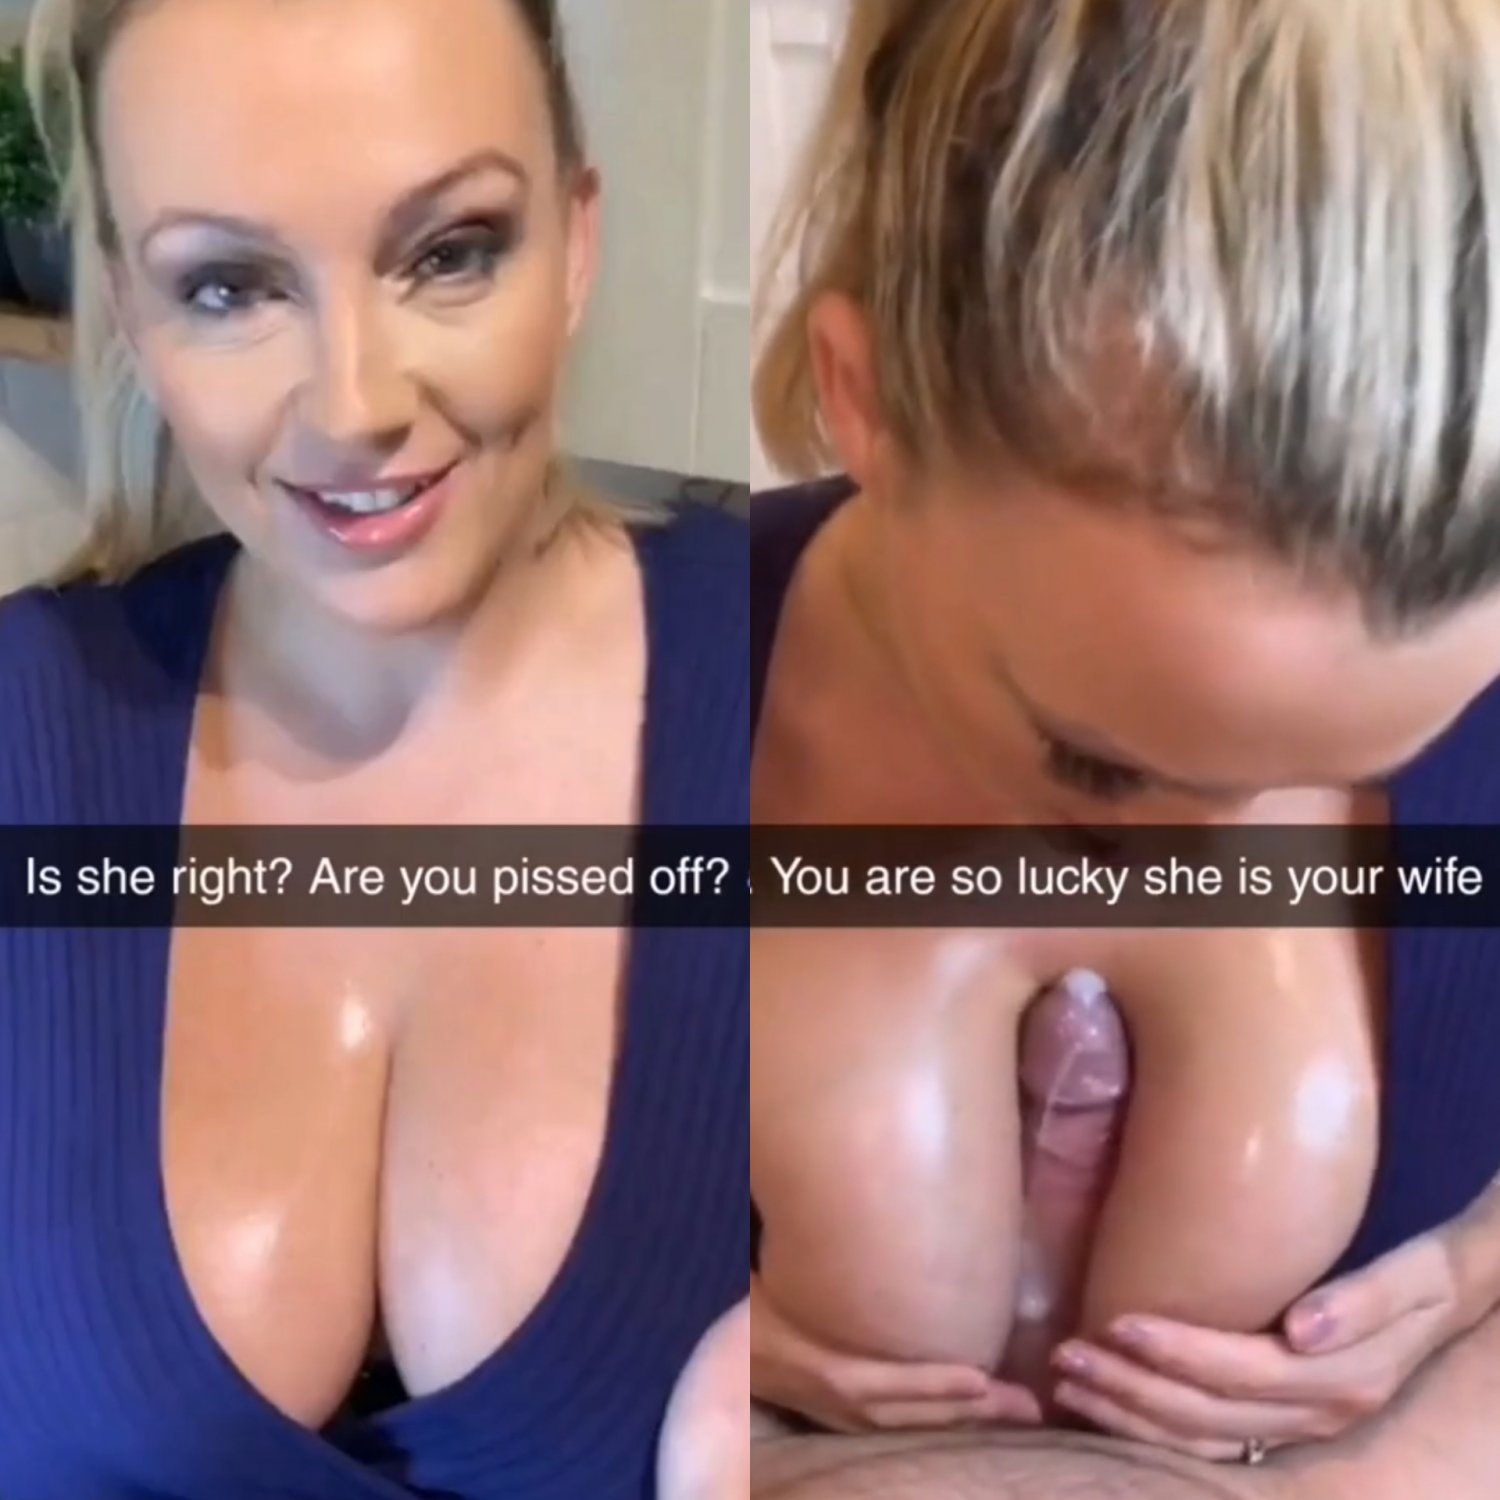 Cheating wife? 🤔 - Porn Videos and Photos photo